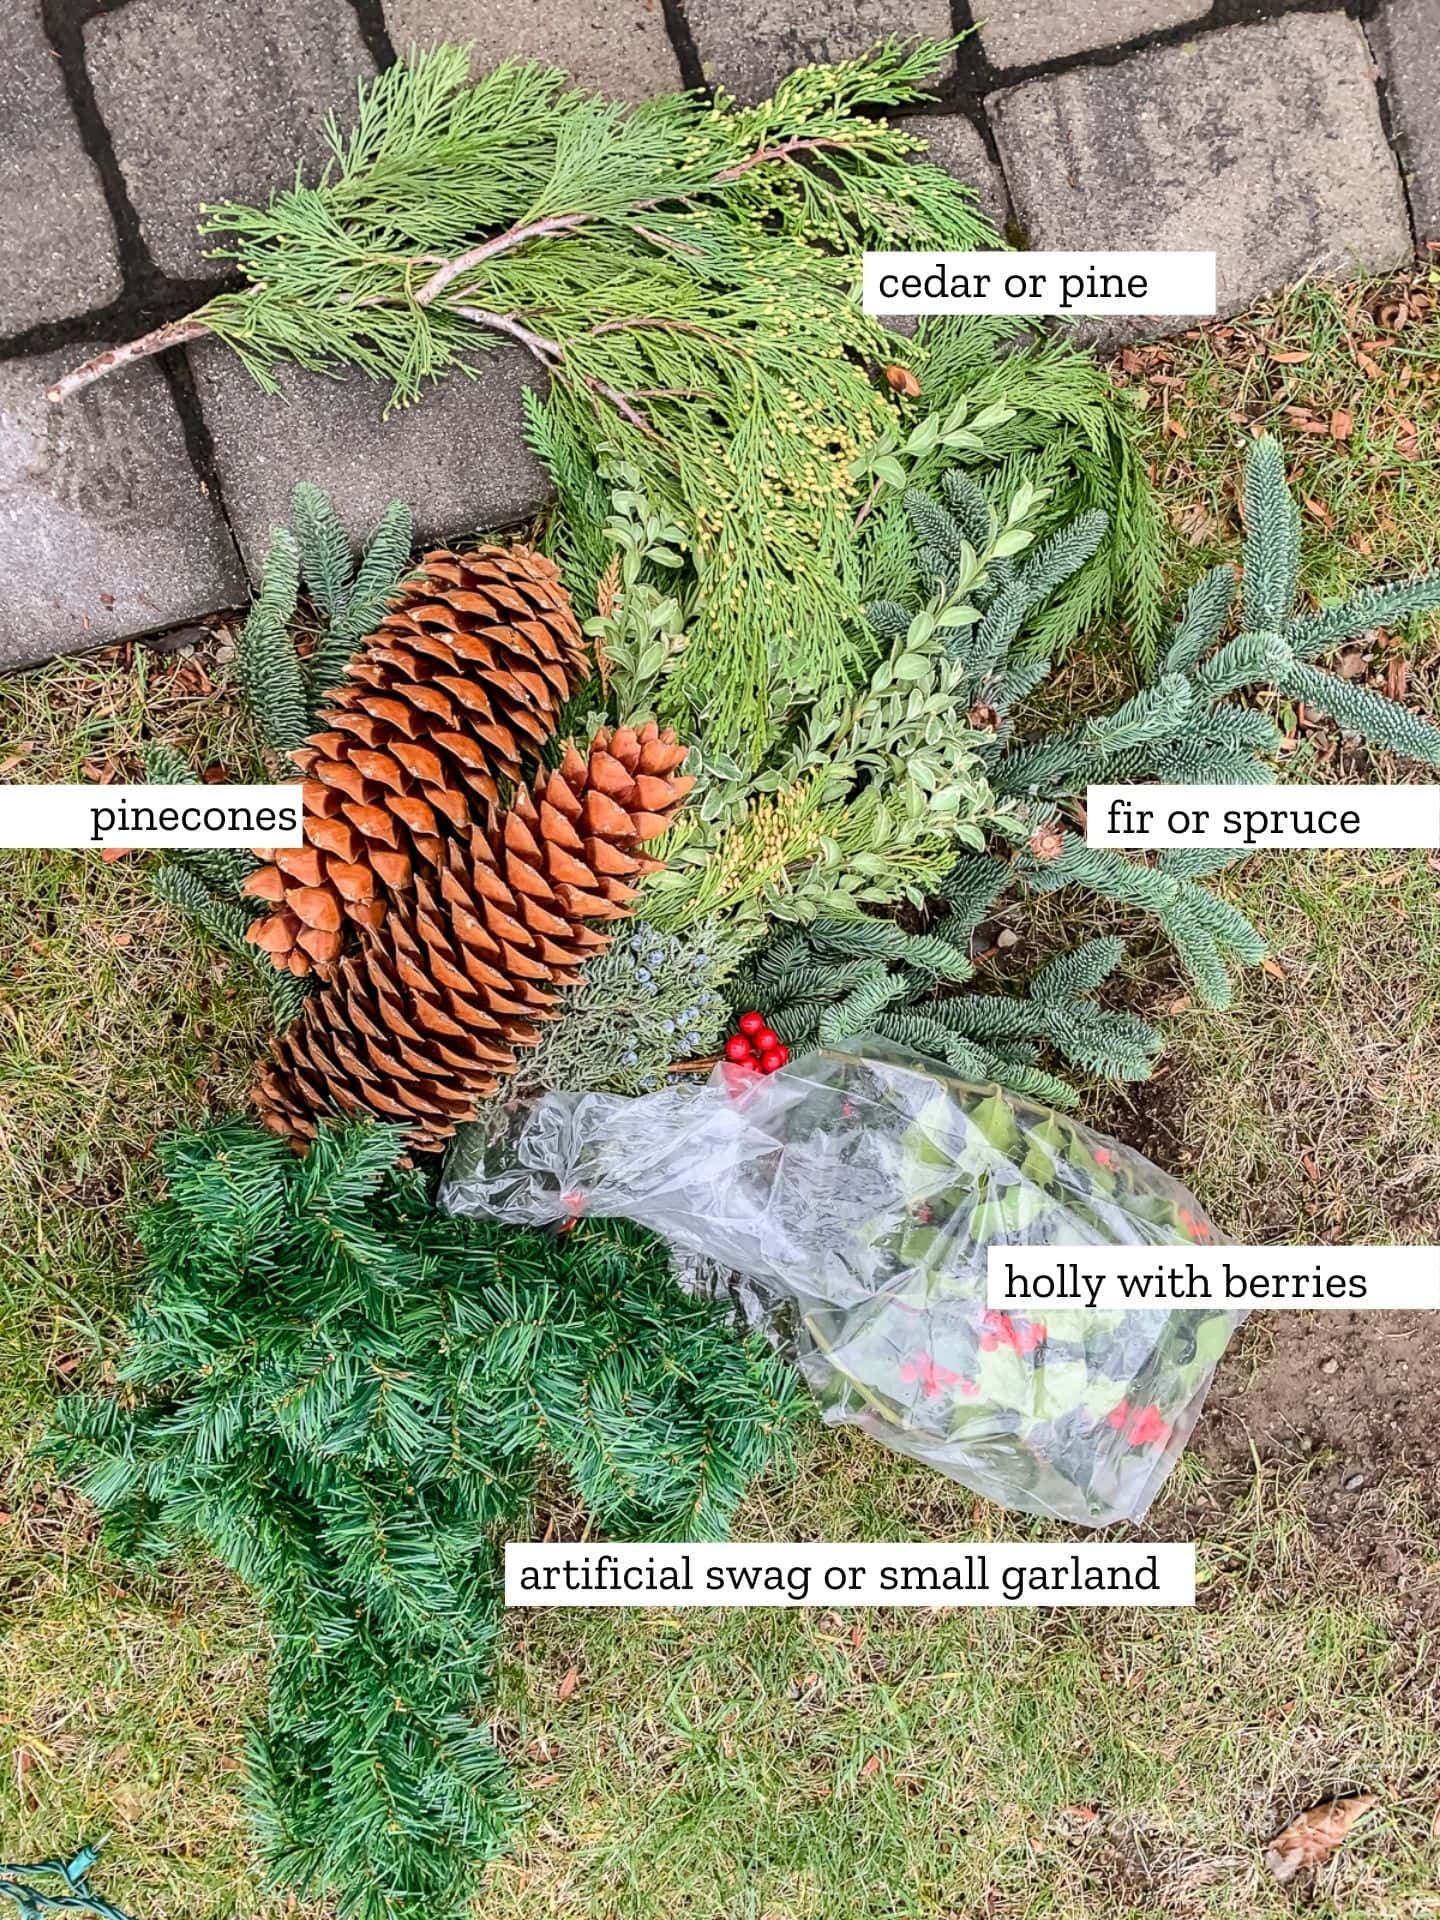 Items needed to assemble the Christmas window boxes: pinecones, artifical garland, holly with berries, fir or spruce and cedar or pine